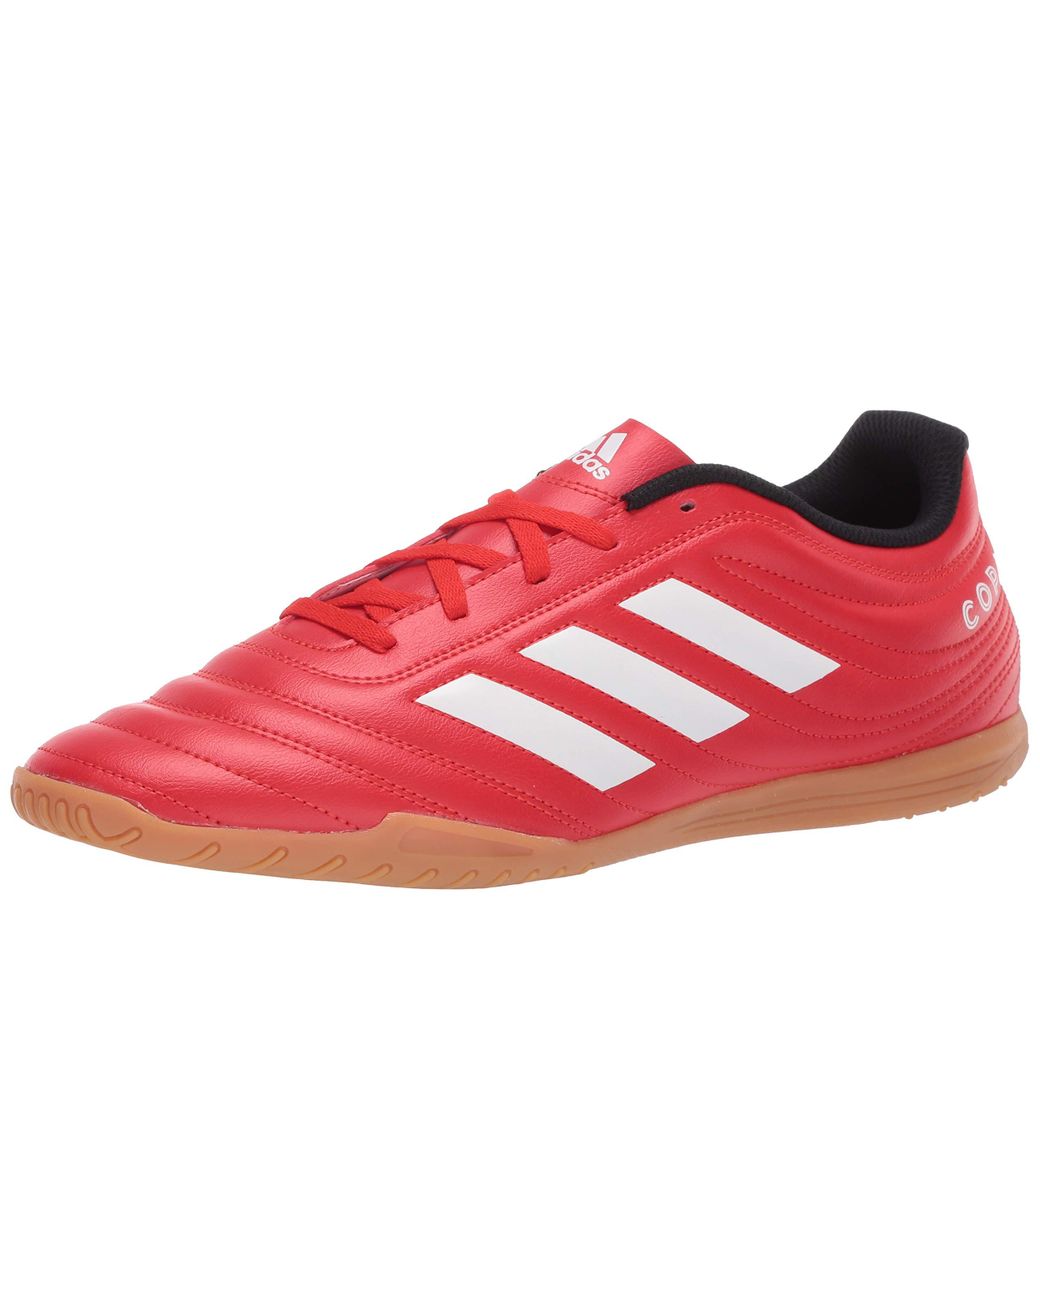 adidas Lace Copa 20.4 Indoor Boots Soccer Shoe in Red for Men - Lyst